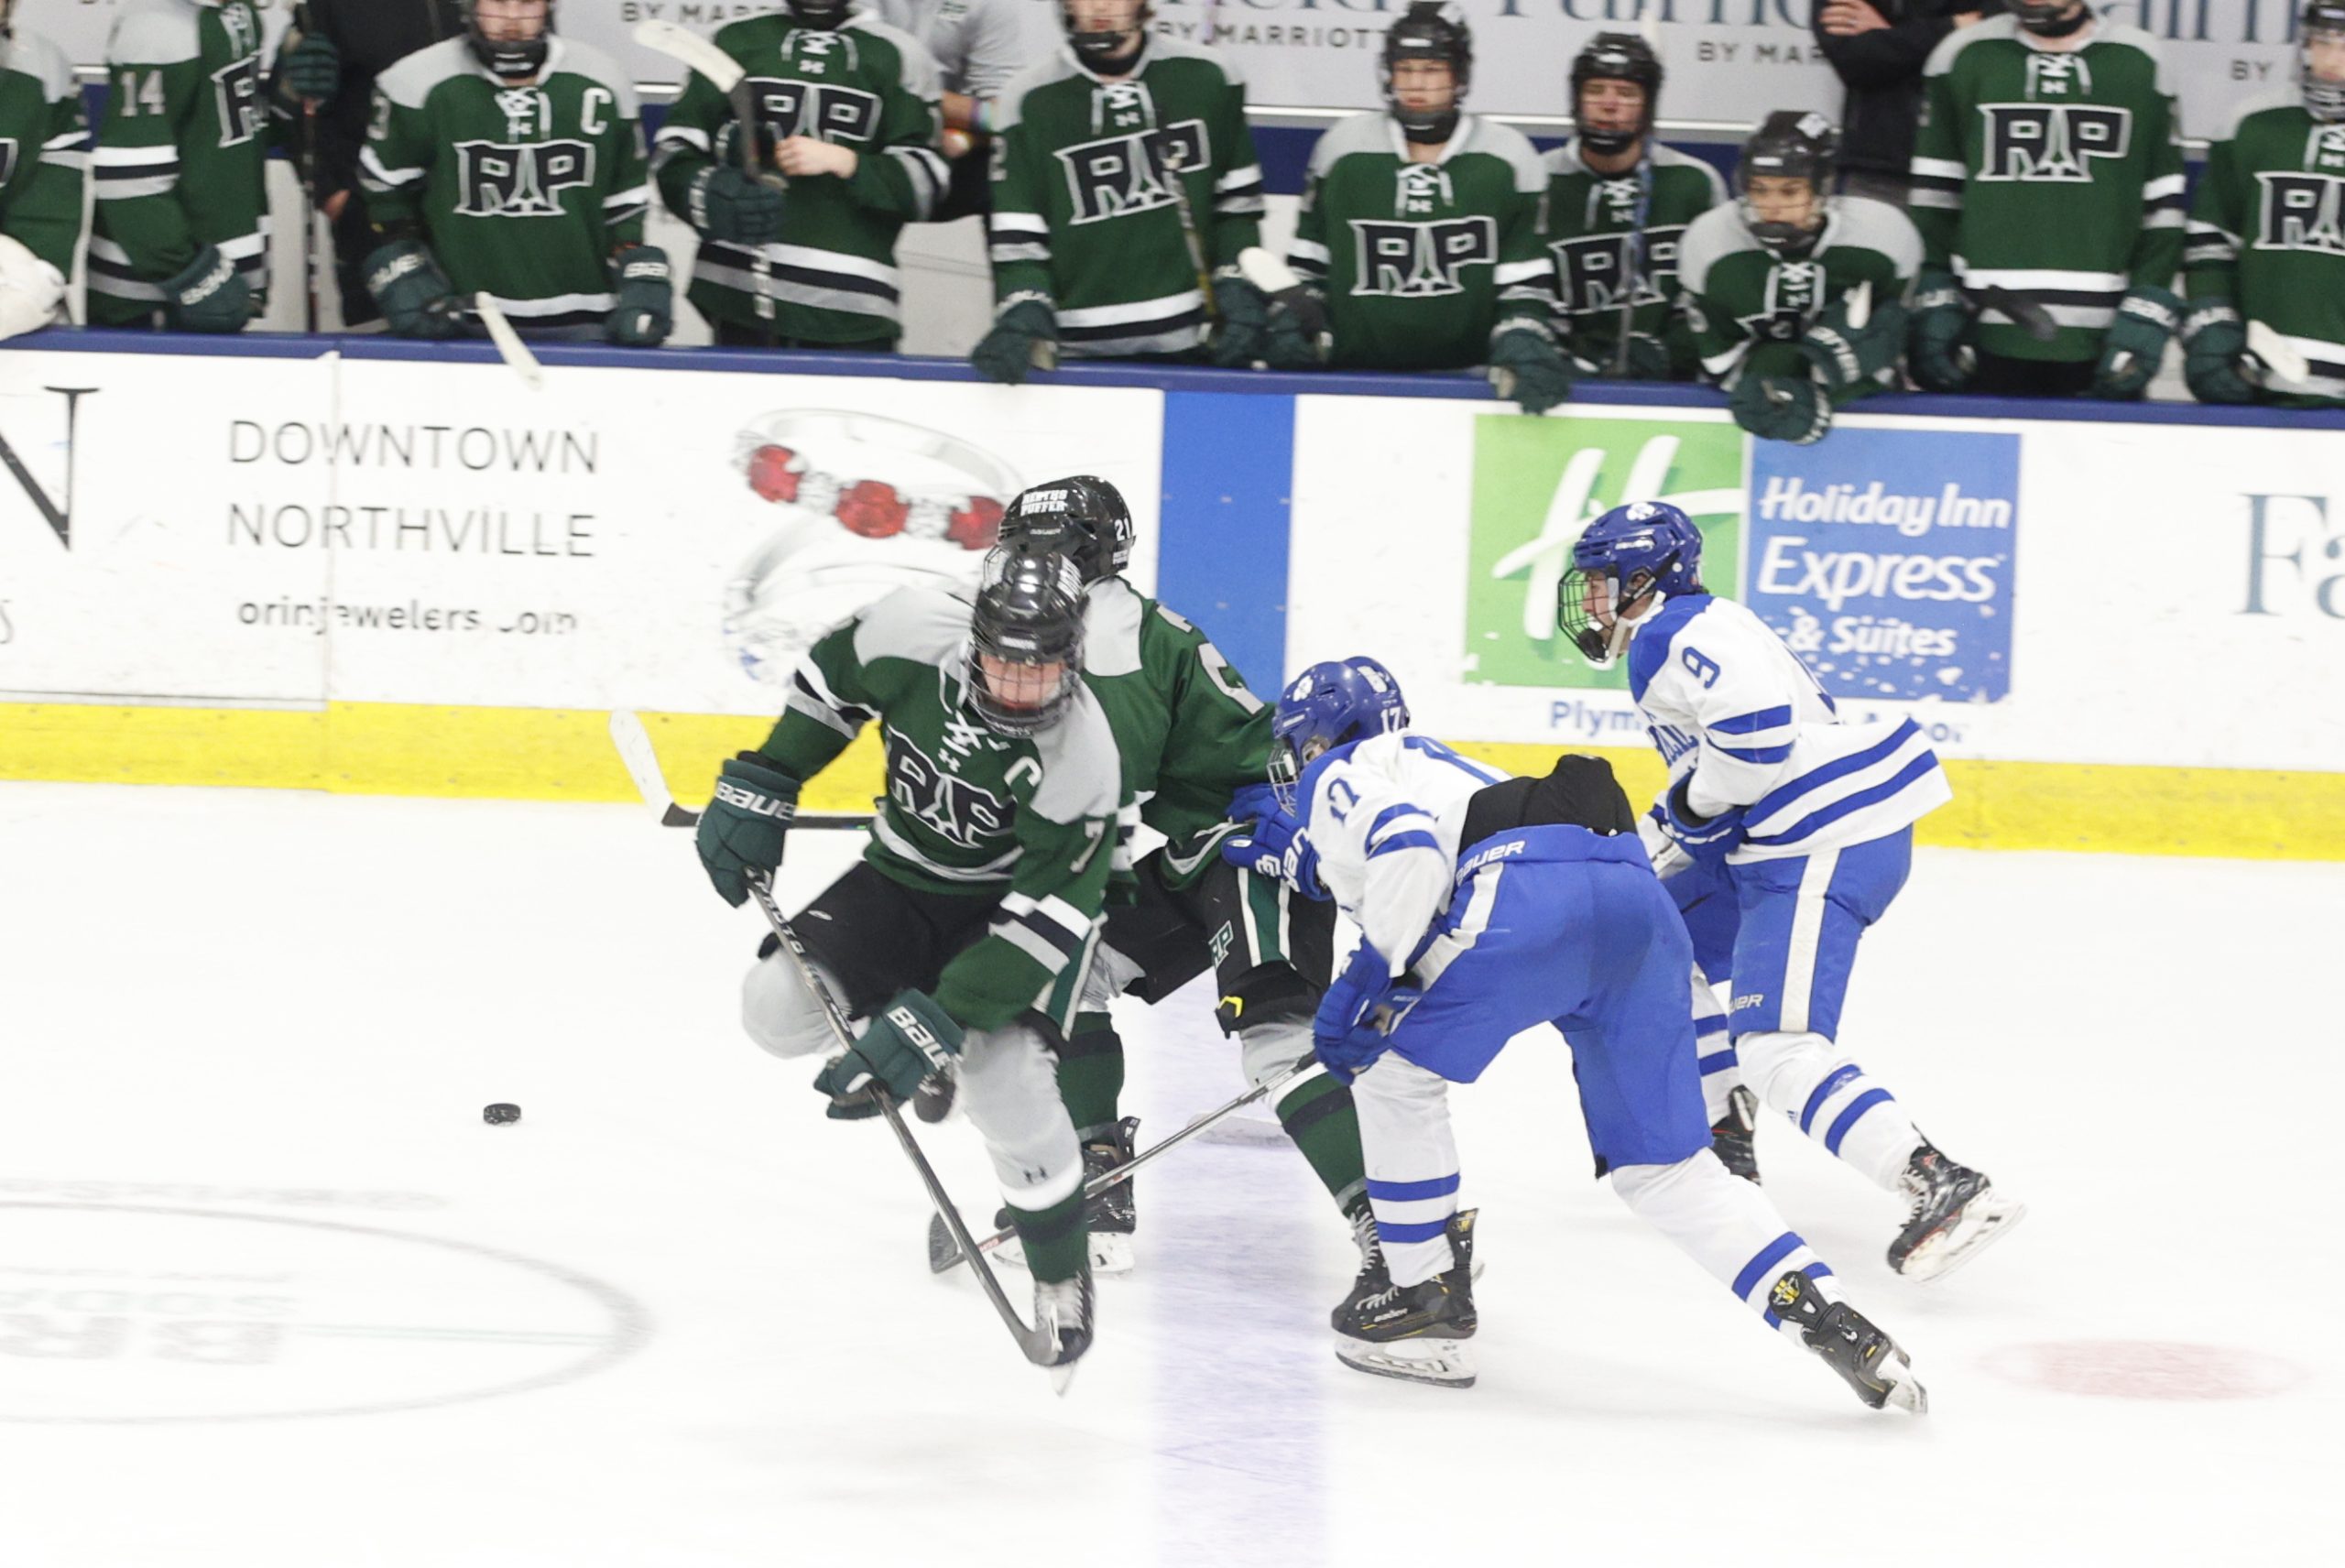 Reeths-Puffer hockey takes lopsided loss against highly touted Detroit Catholic Central in state semifinal